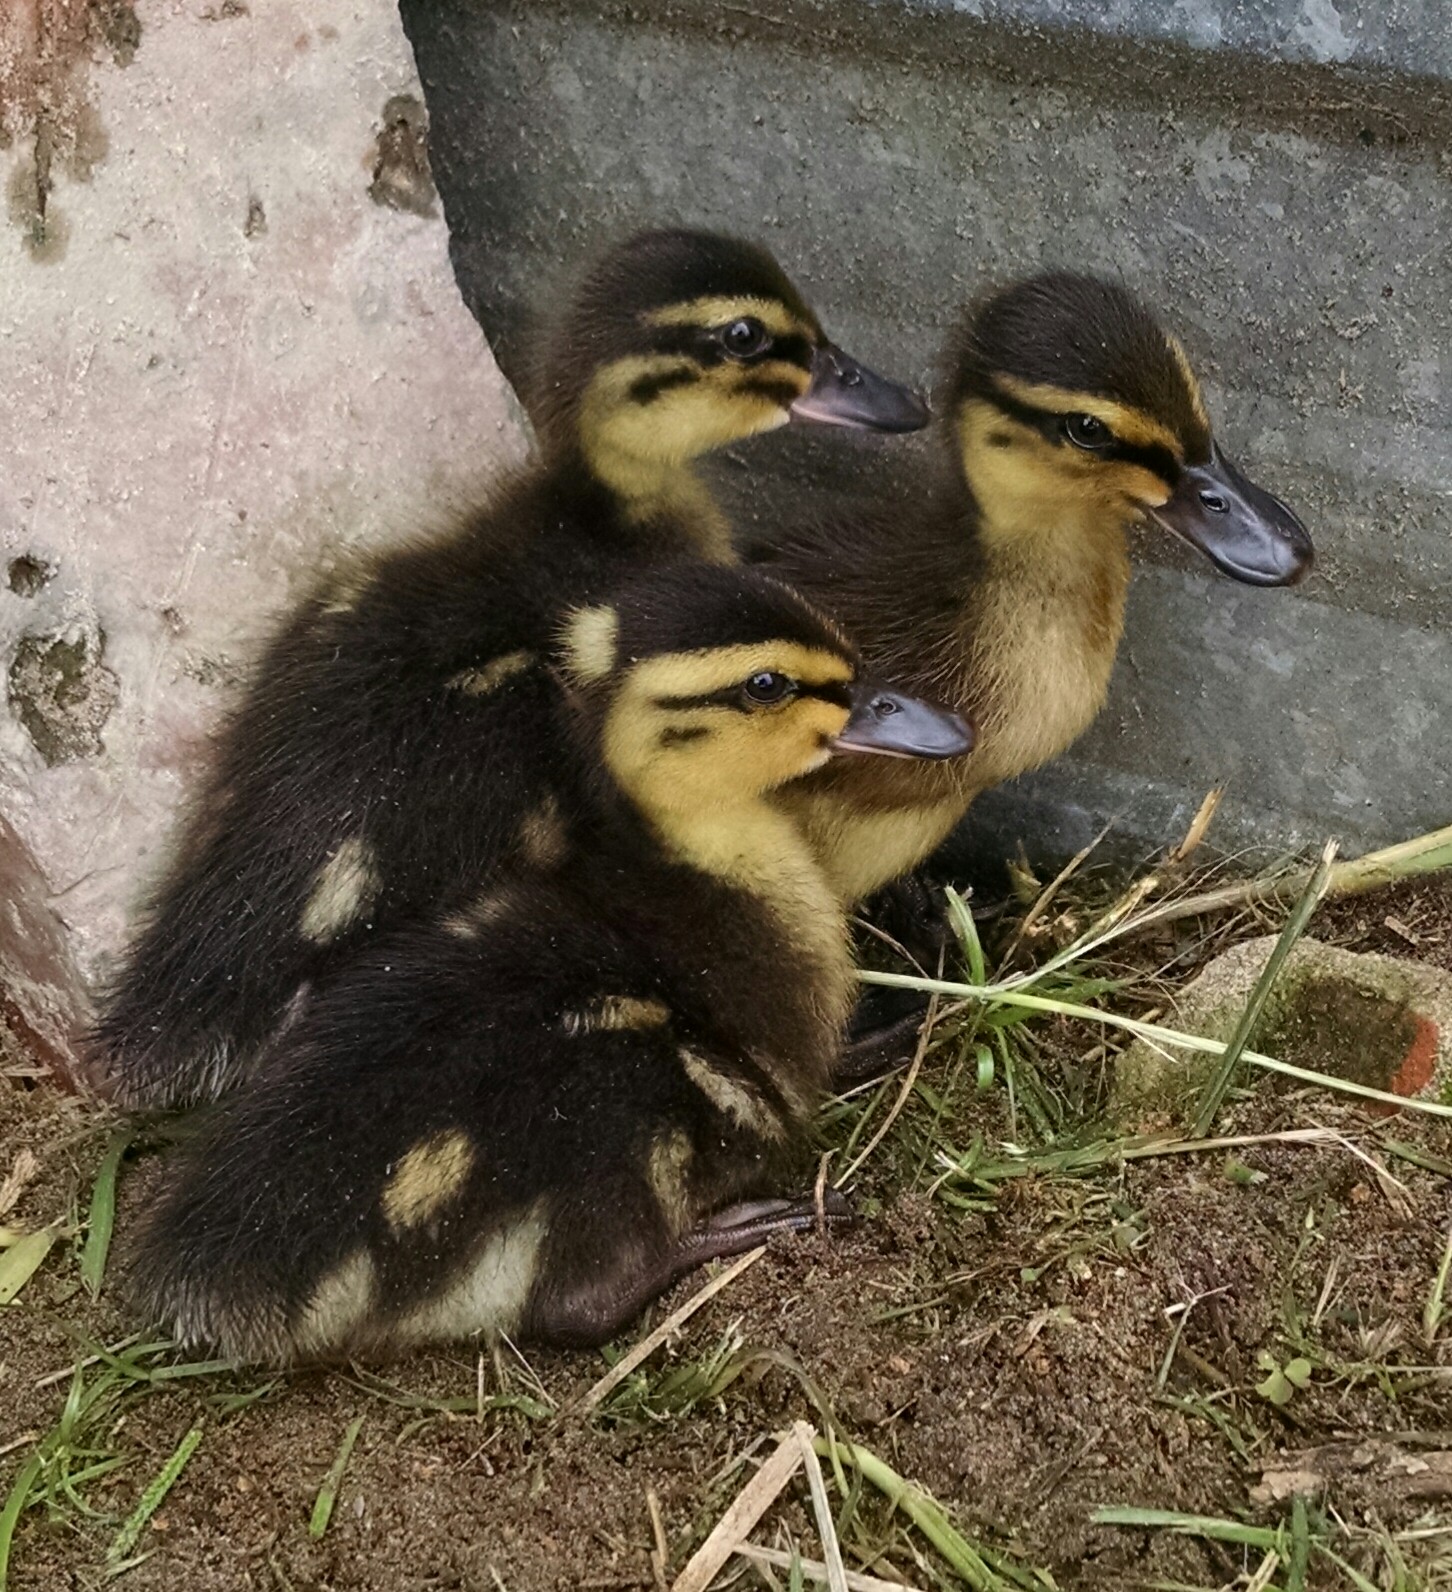 Our 6 day old baby mallards